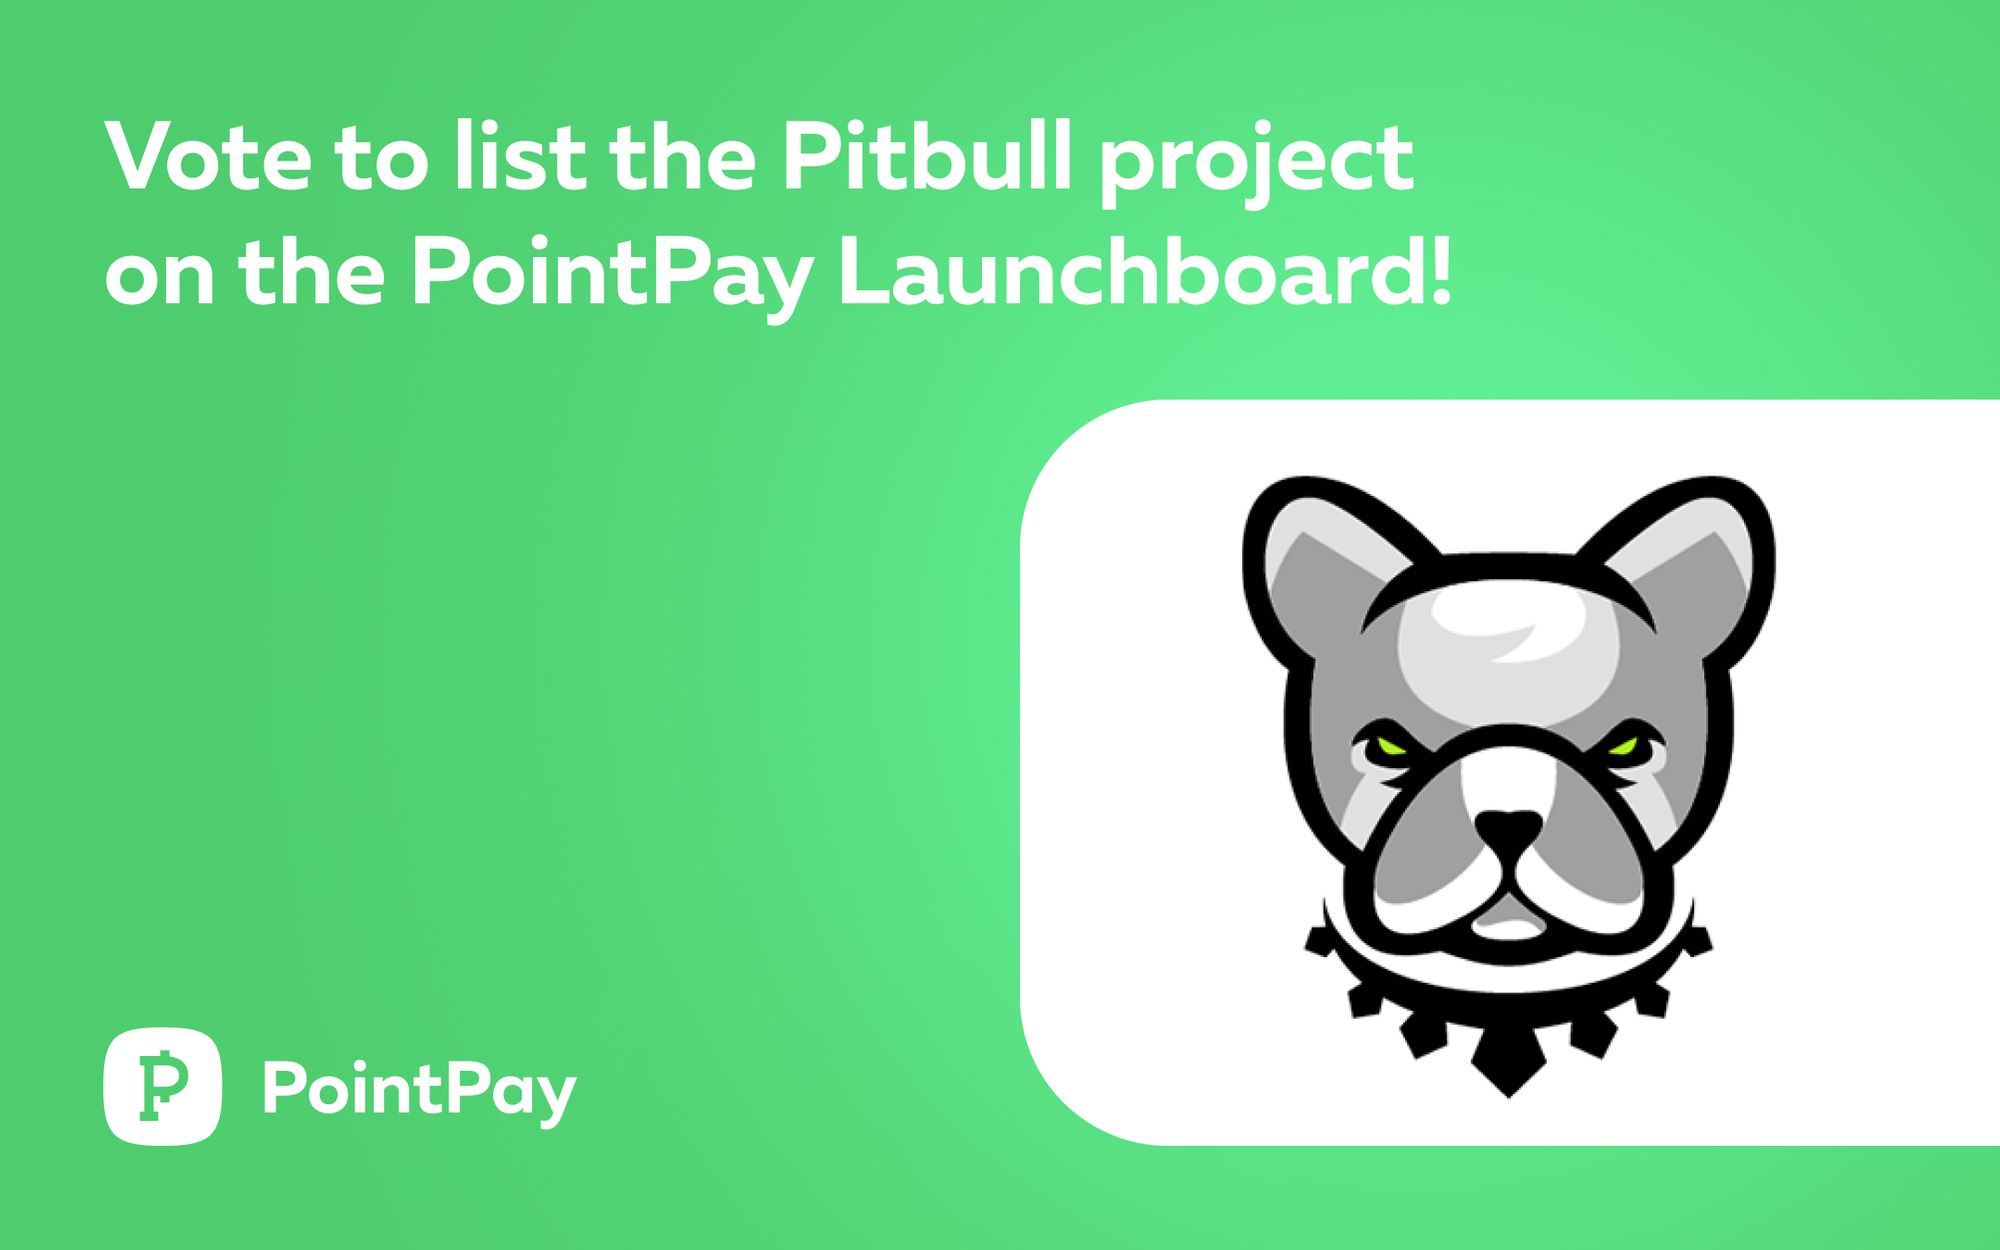 The Pitbull project is up for voting on the PointPay Launchboard!